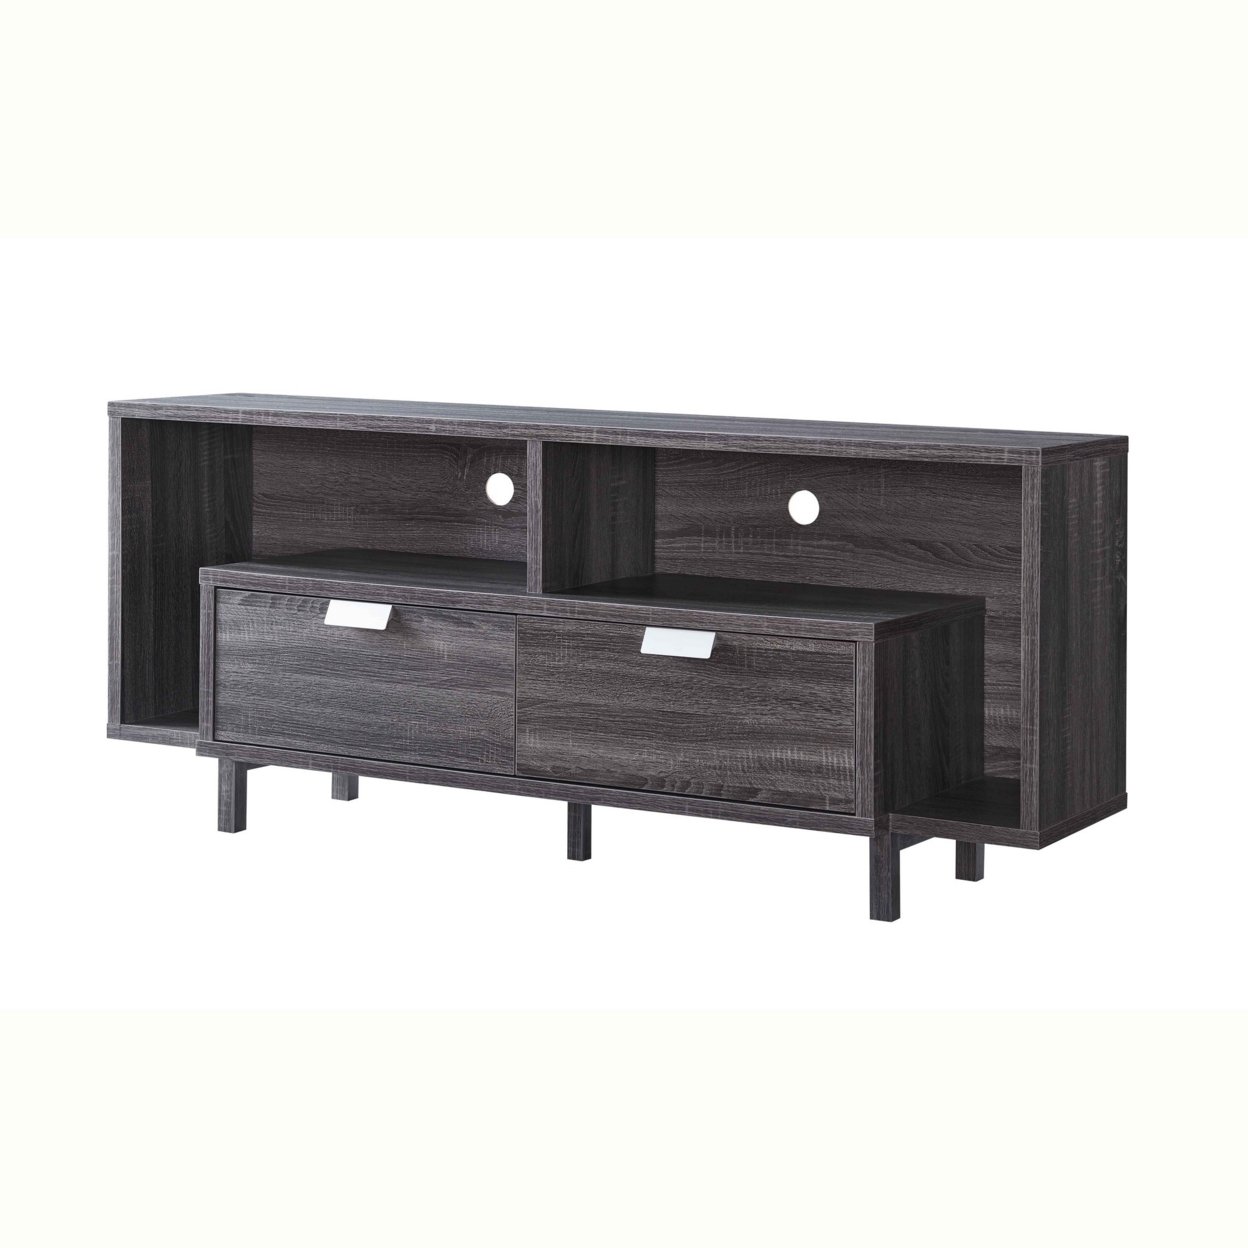 TV Stand With 2 Wooden Shelves And 2 Drawers, Gray- Saltoro Sherpi